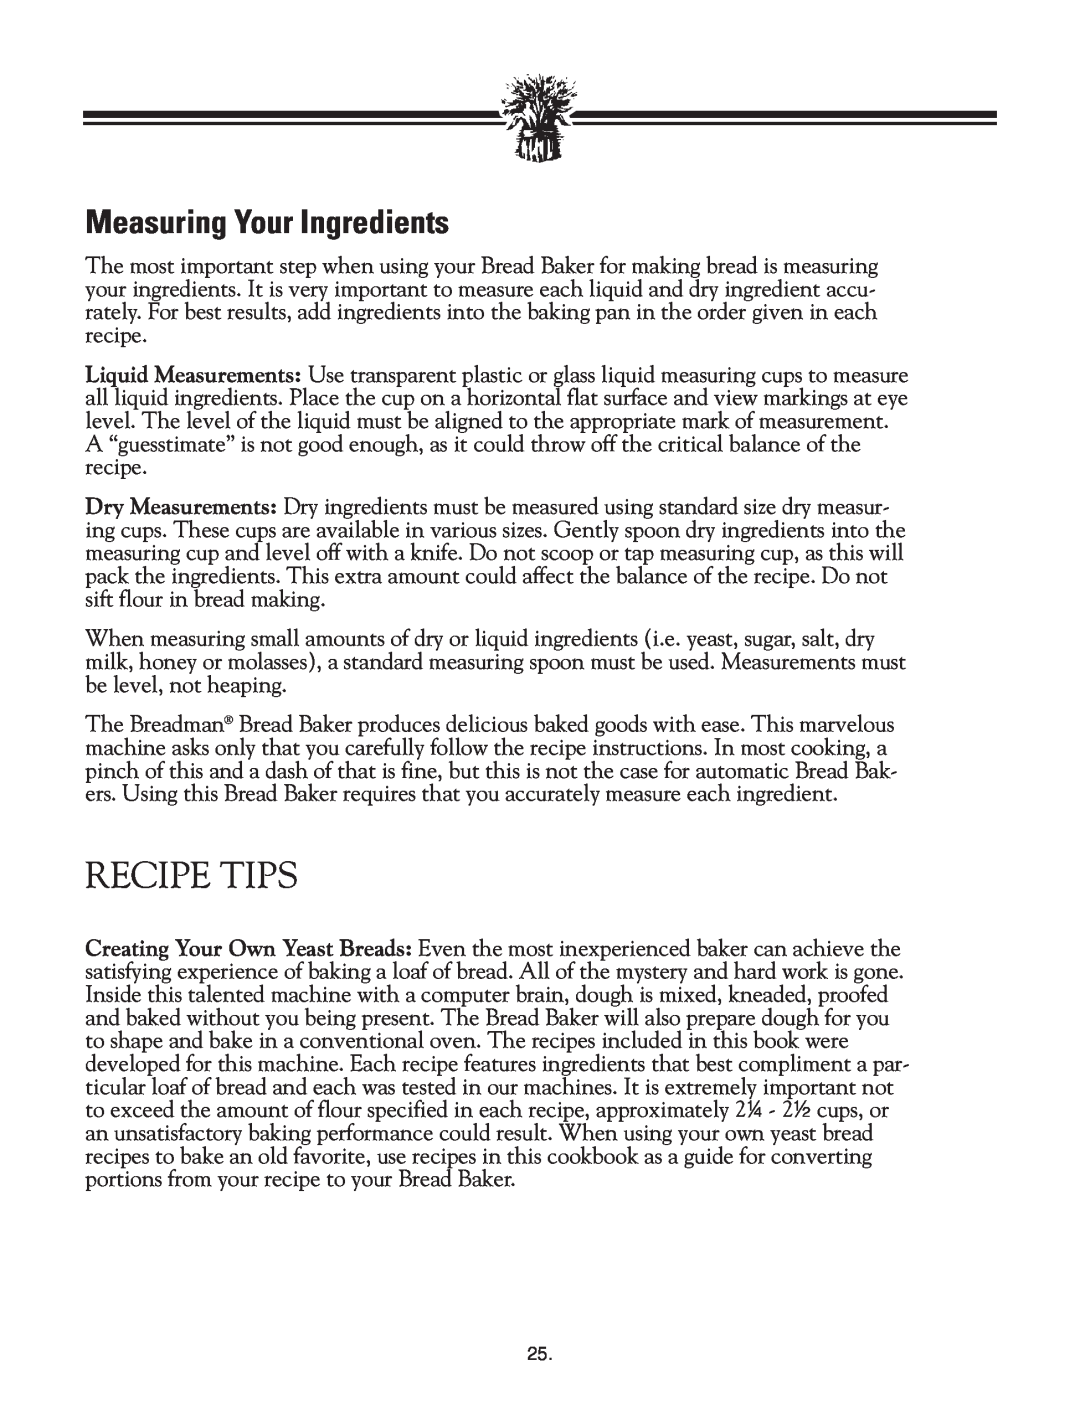 Breadman TR2828G instruction manual Recipe Tips, Measuring Your Ingredients 